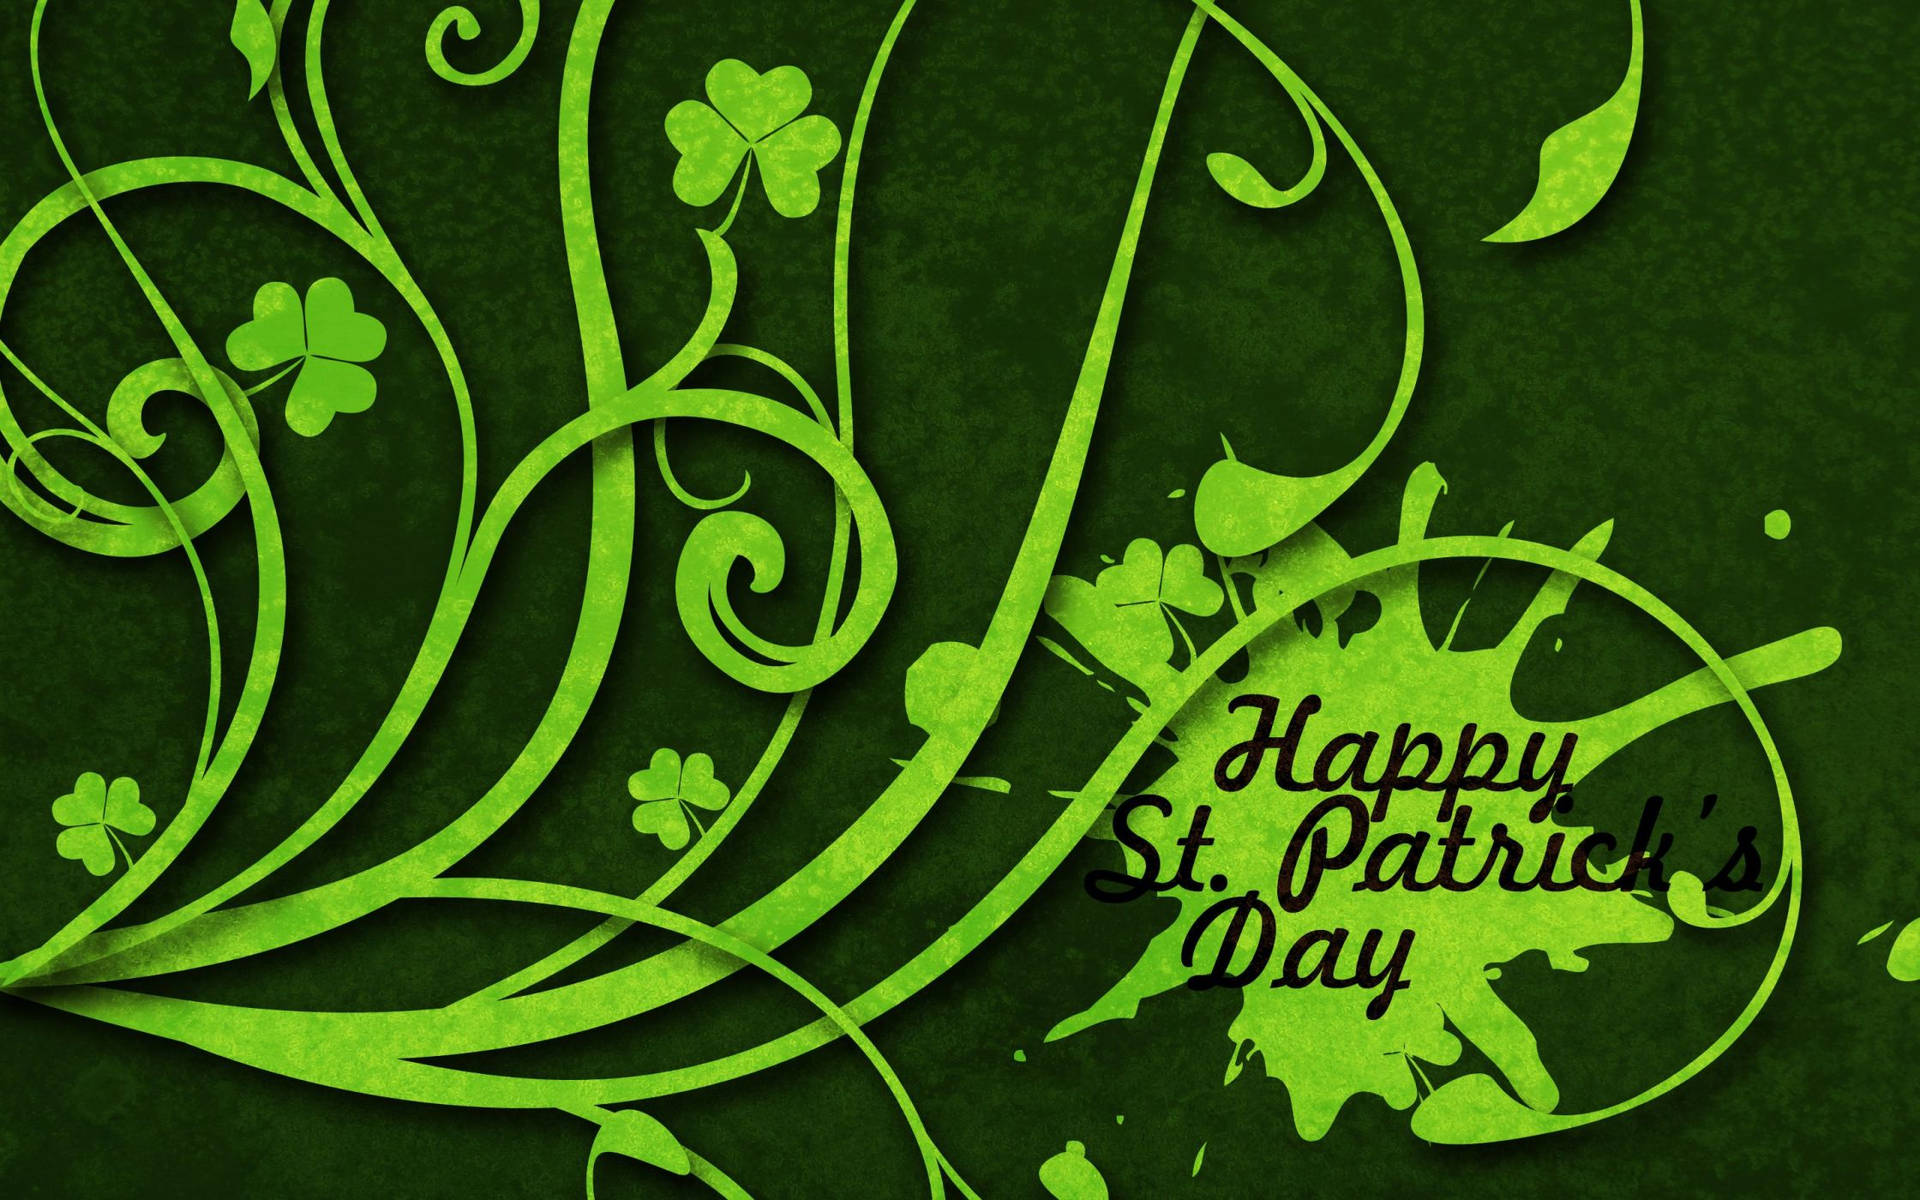 Saint Patrick’s Day With Green Paint Splatter